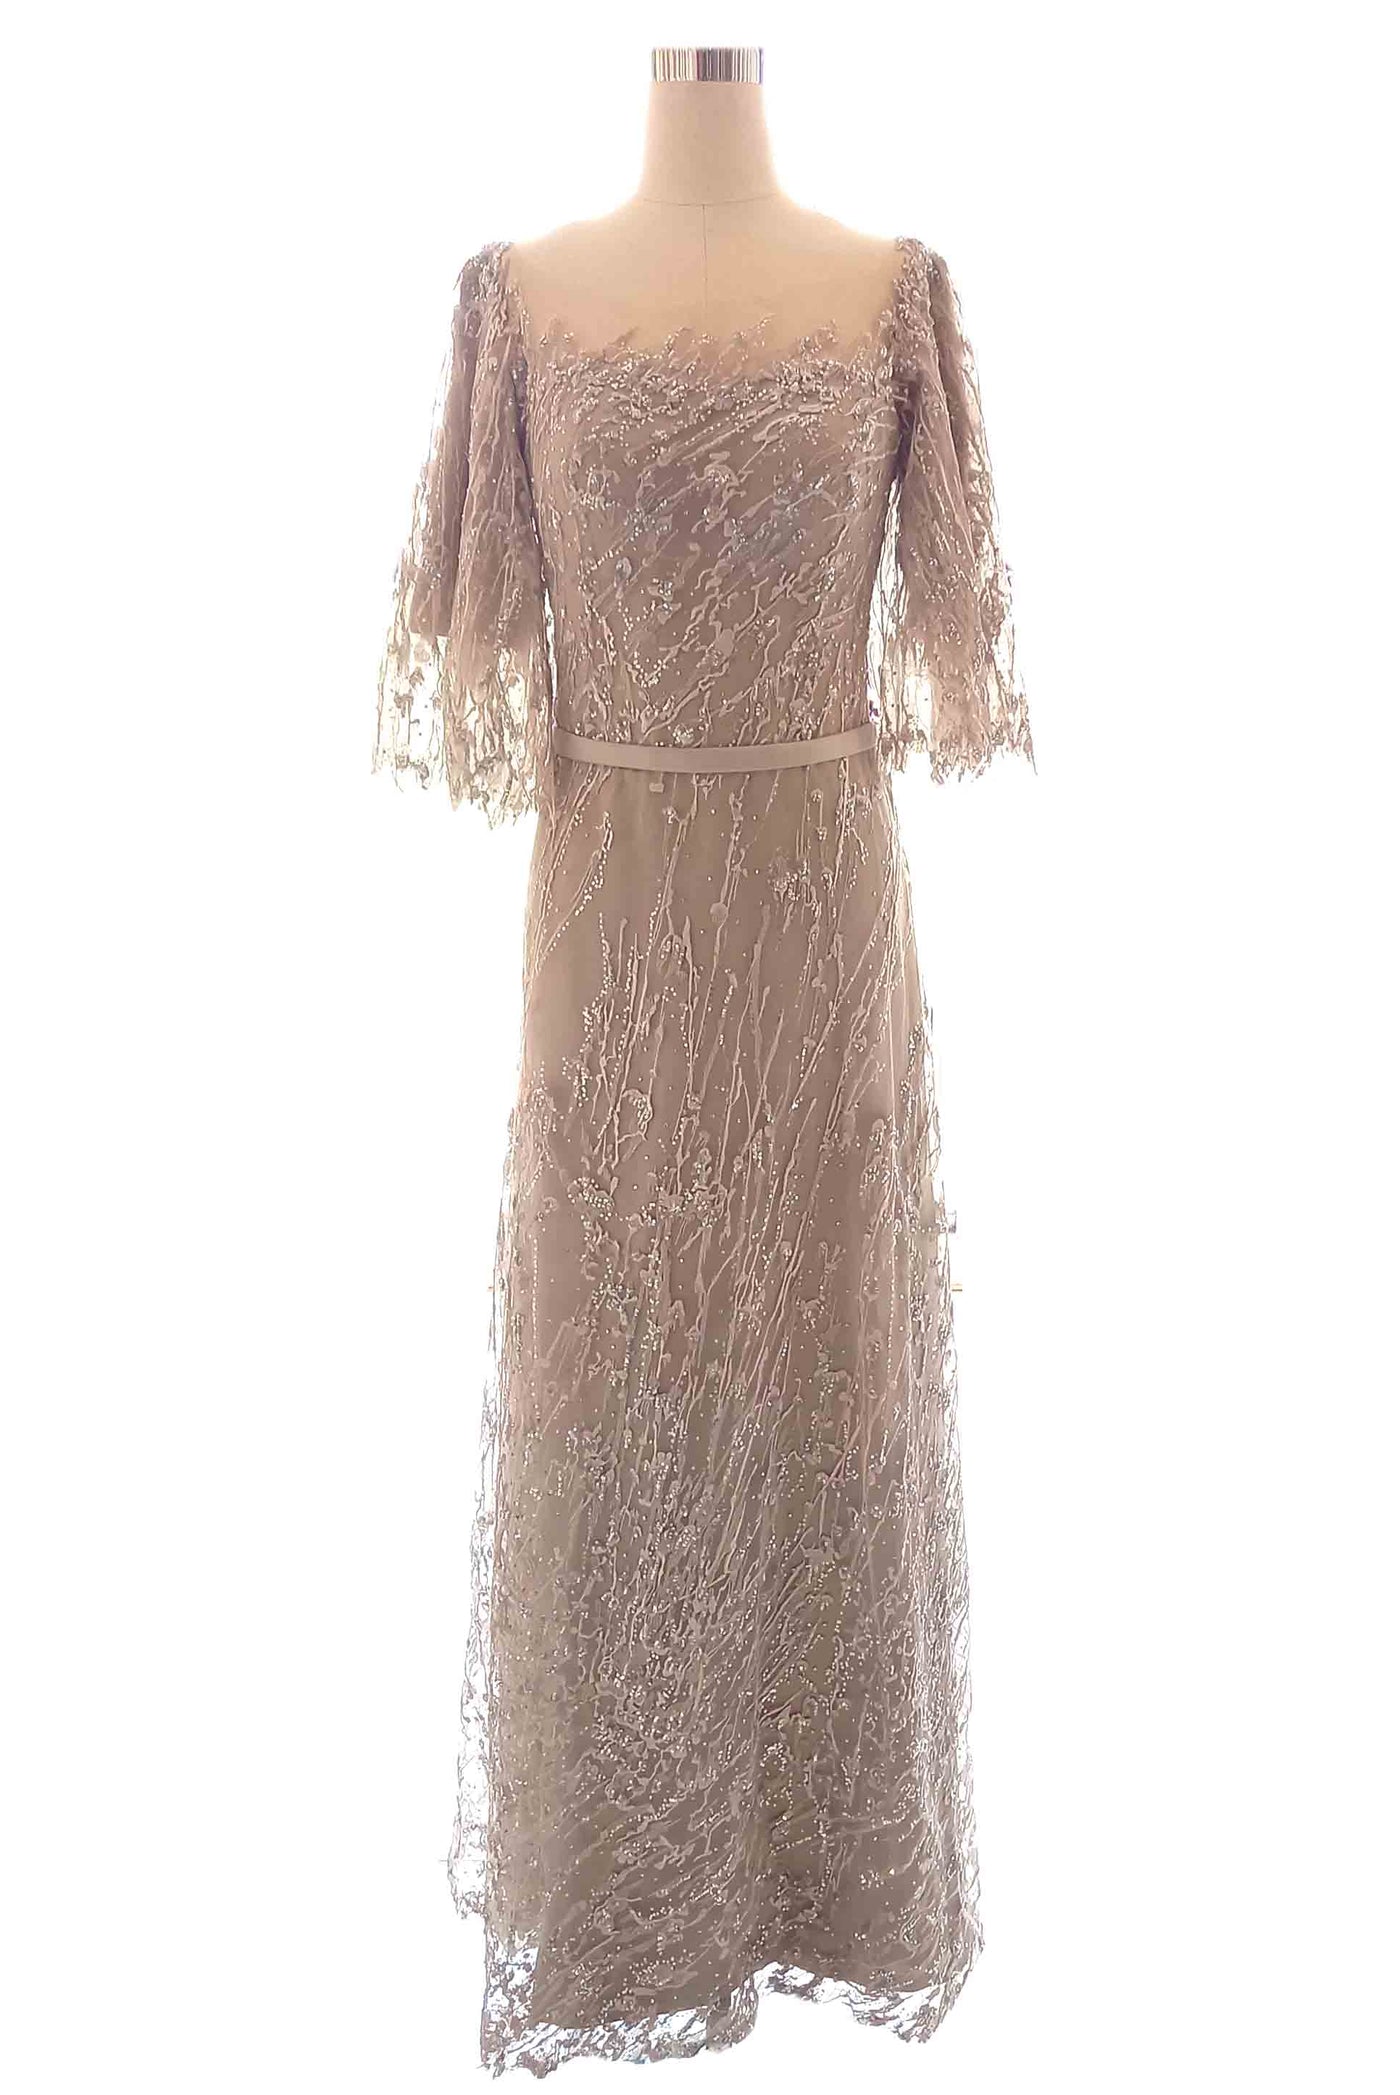 Rent: Andreas Odang - Silver Longdress with Beaded at Neck